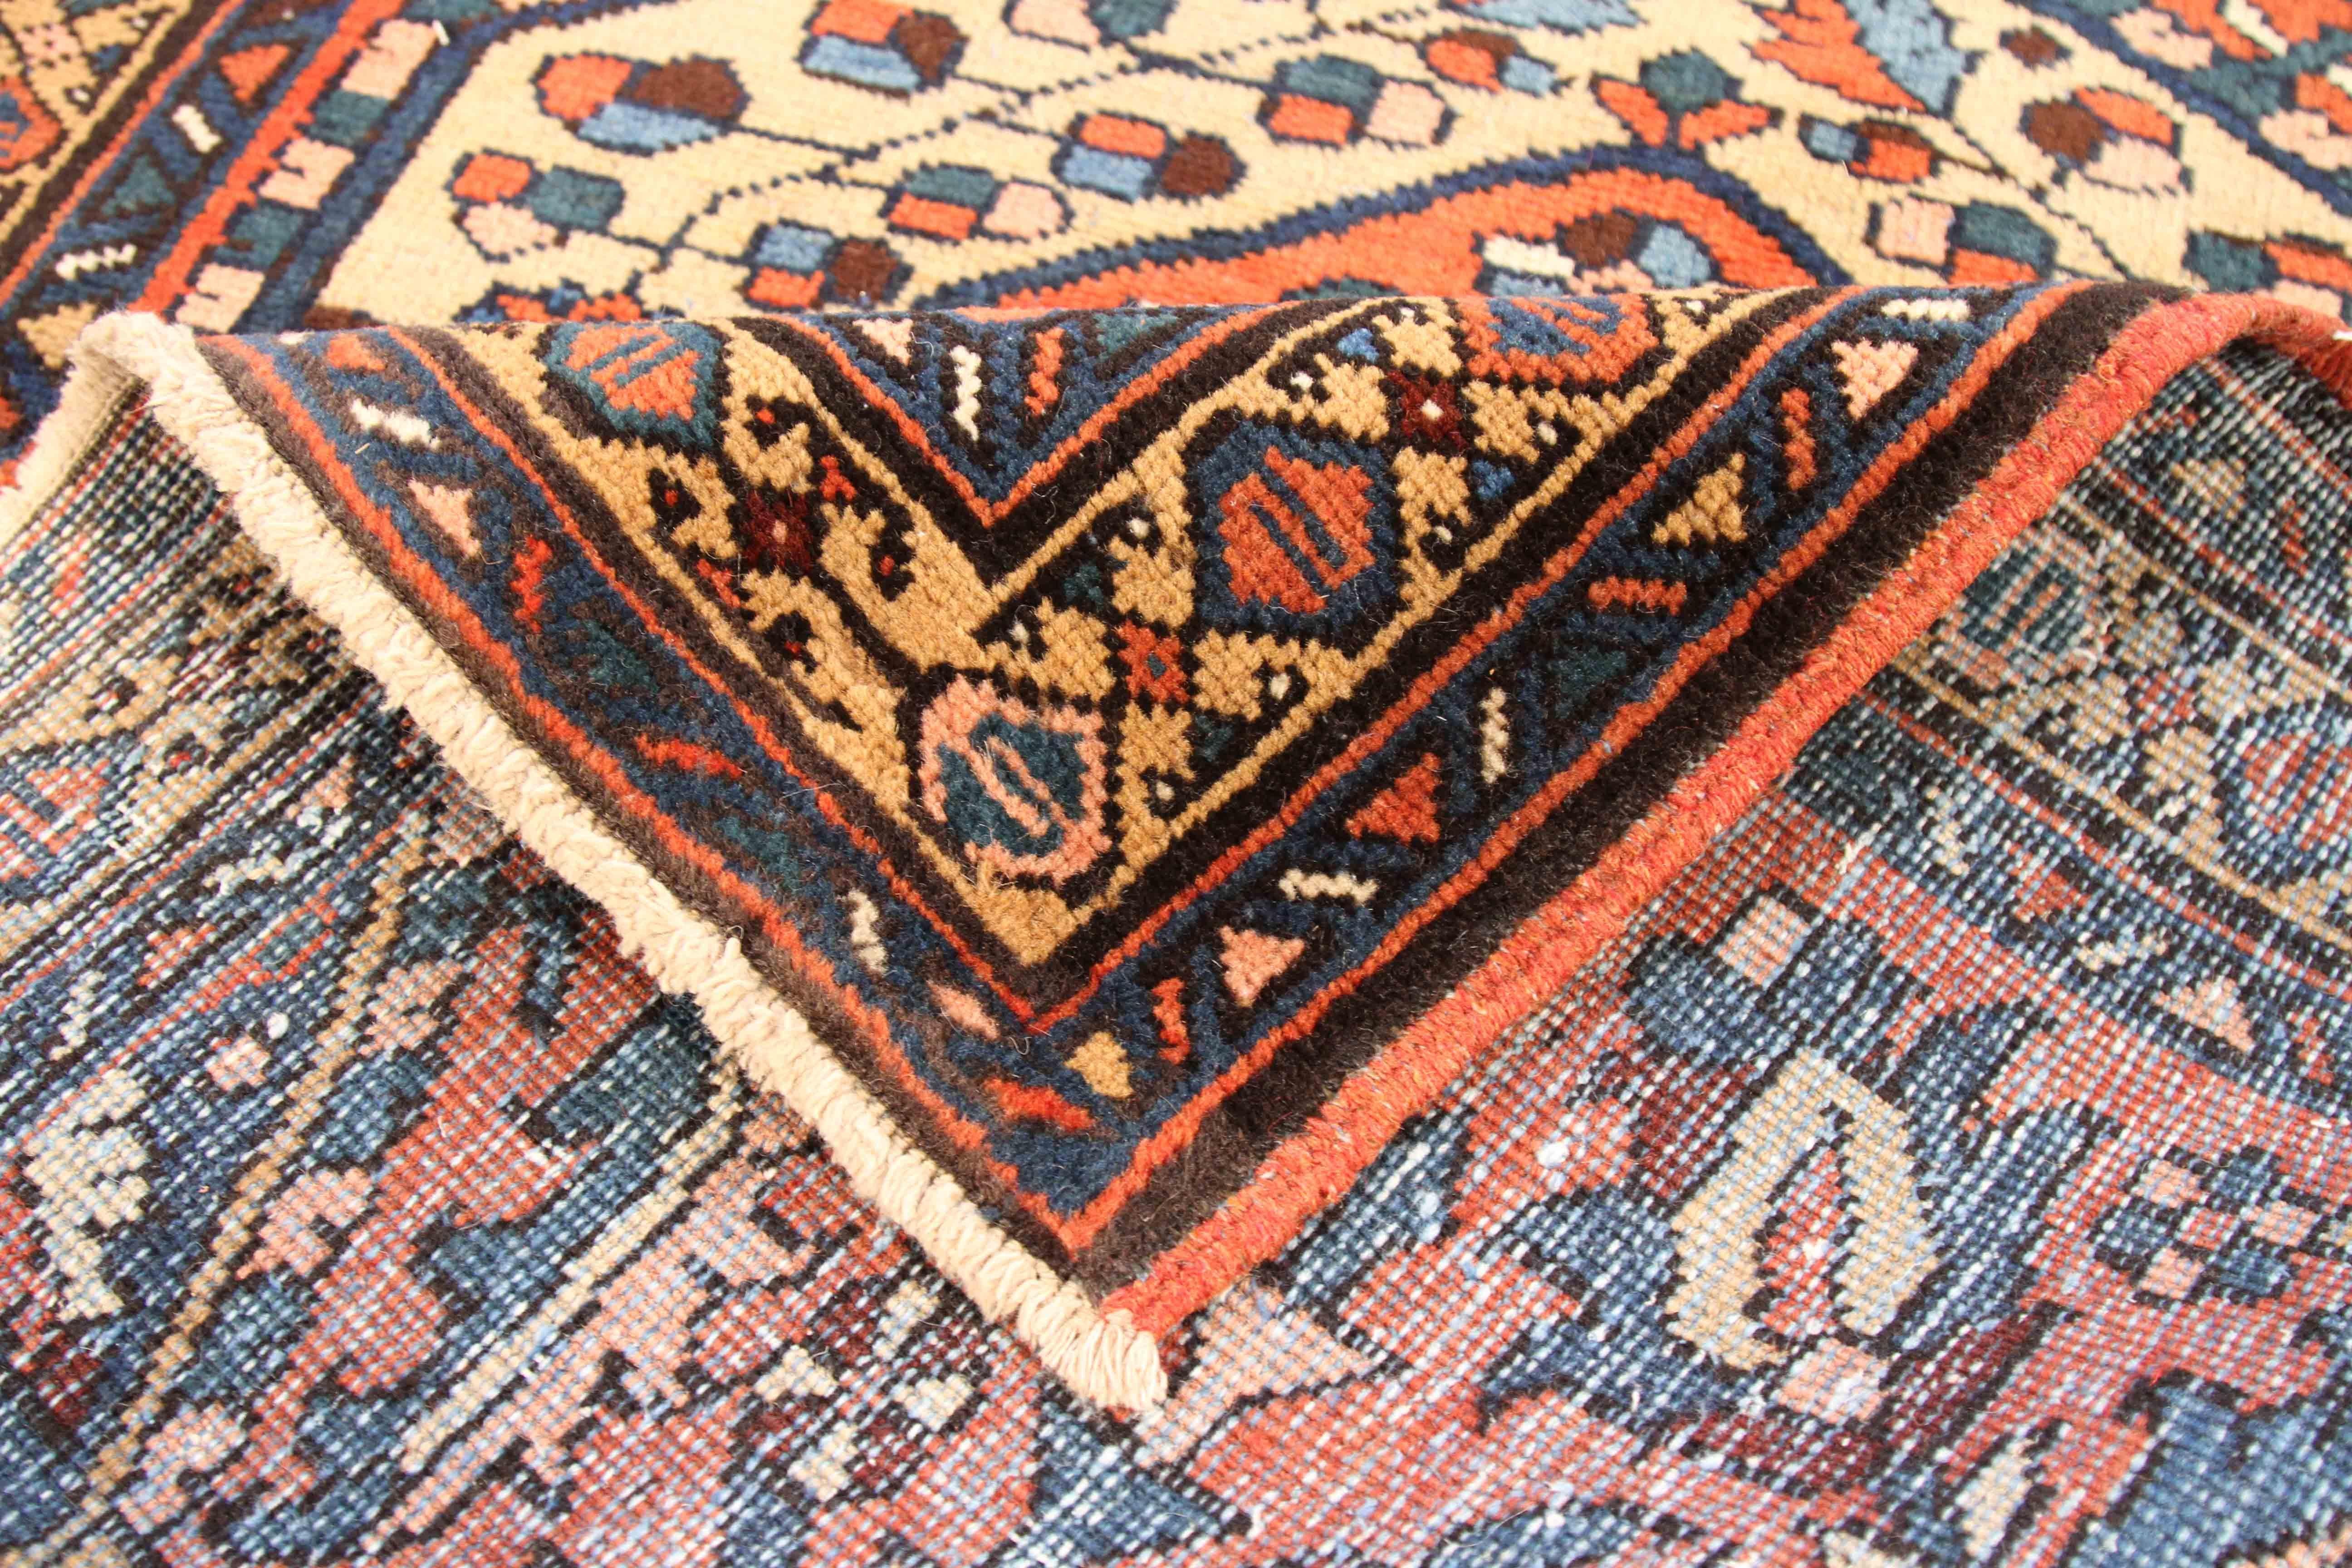 Handwoven from Fine quality wool, this magnificent antique rug was created using patterns inspired by nature. Azerbaijan weavers were masters at depicting flowers and plants in their rug creations which made them desirable. Using vibrant blue, green